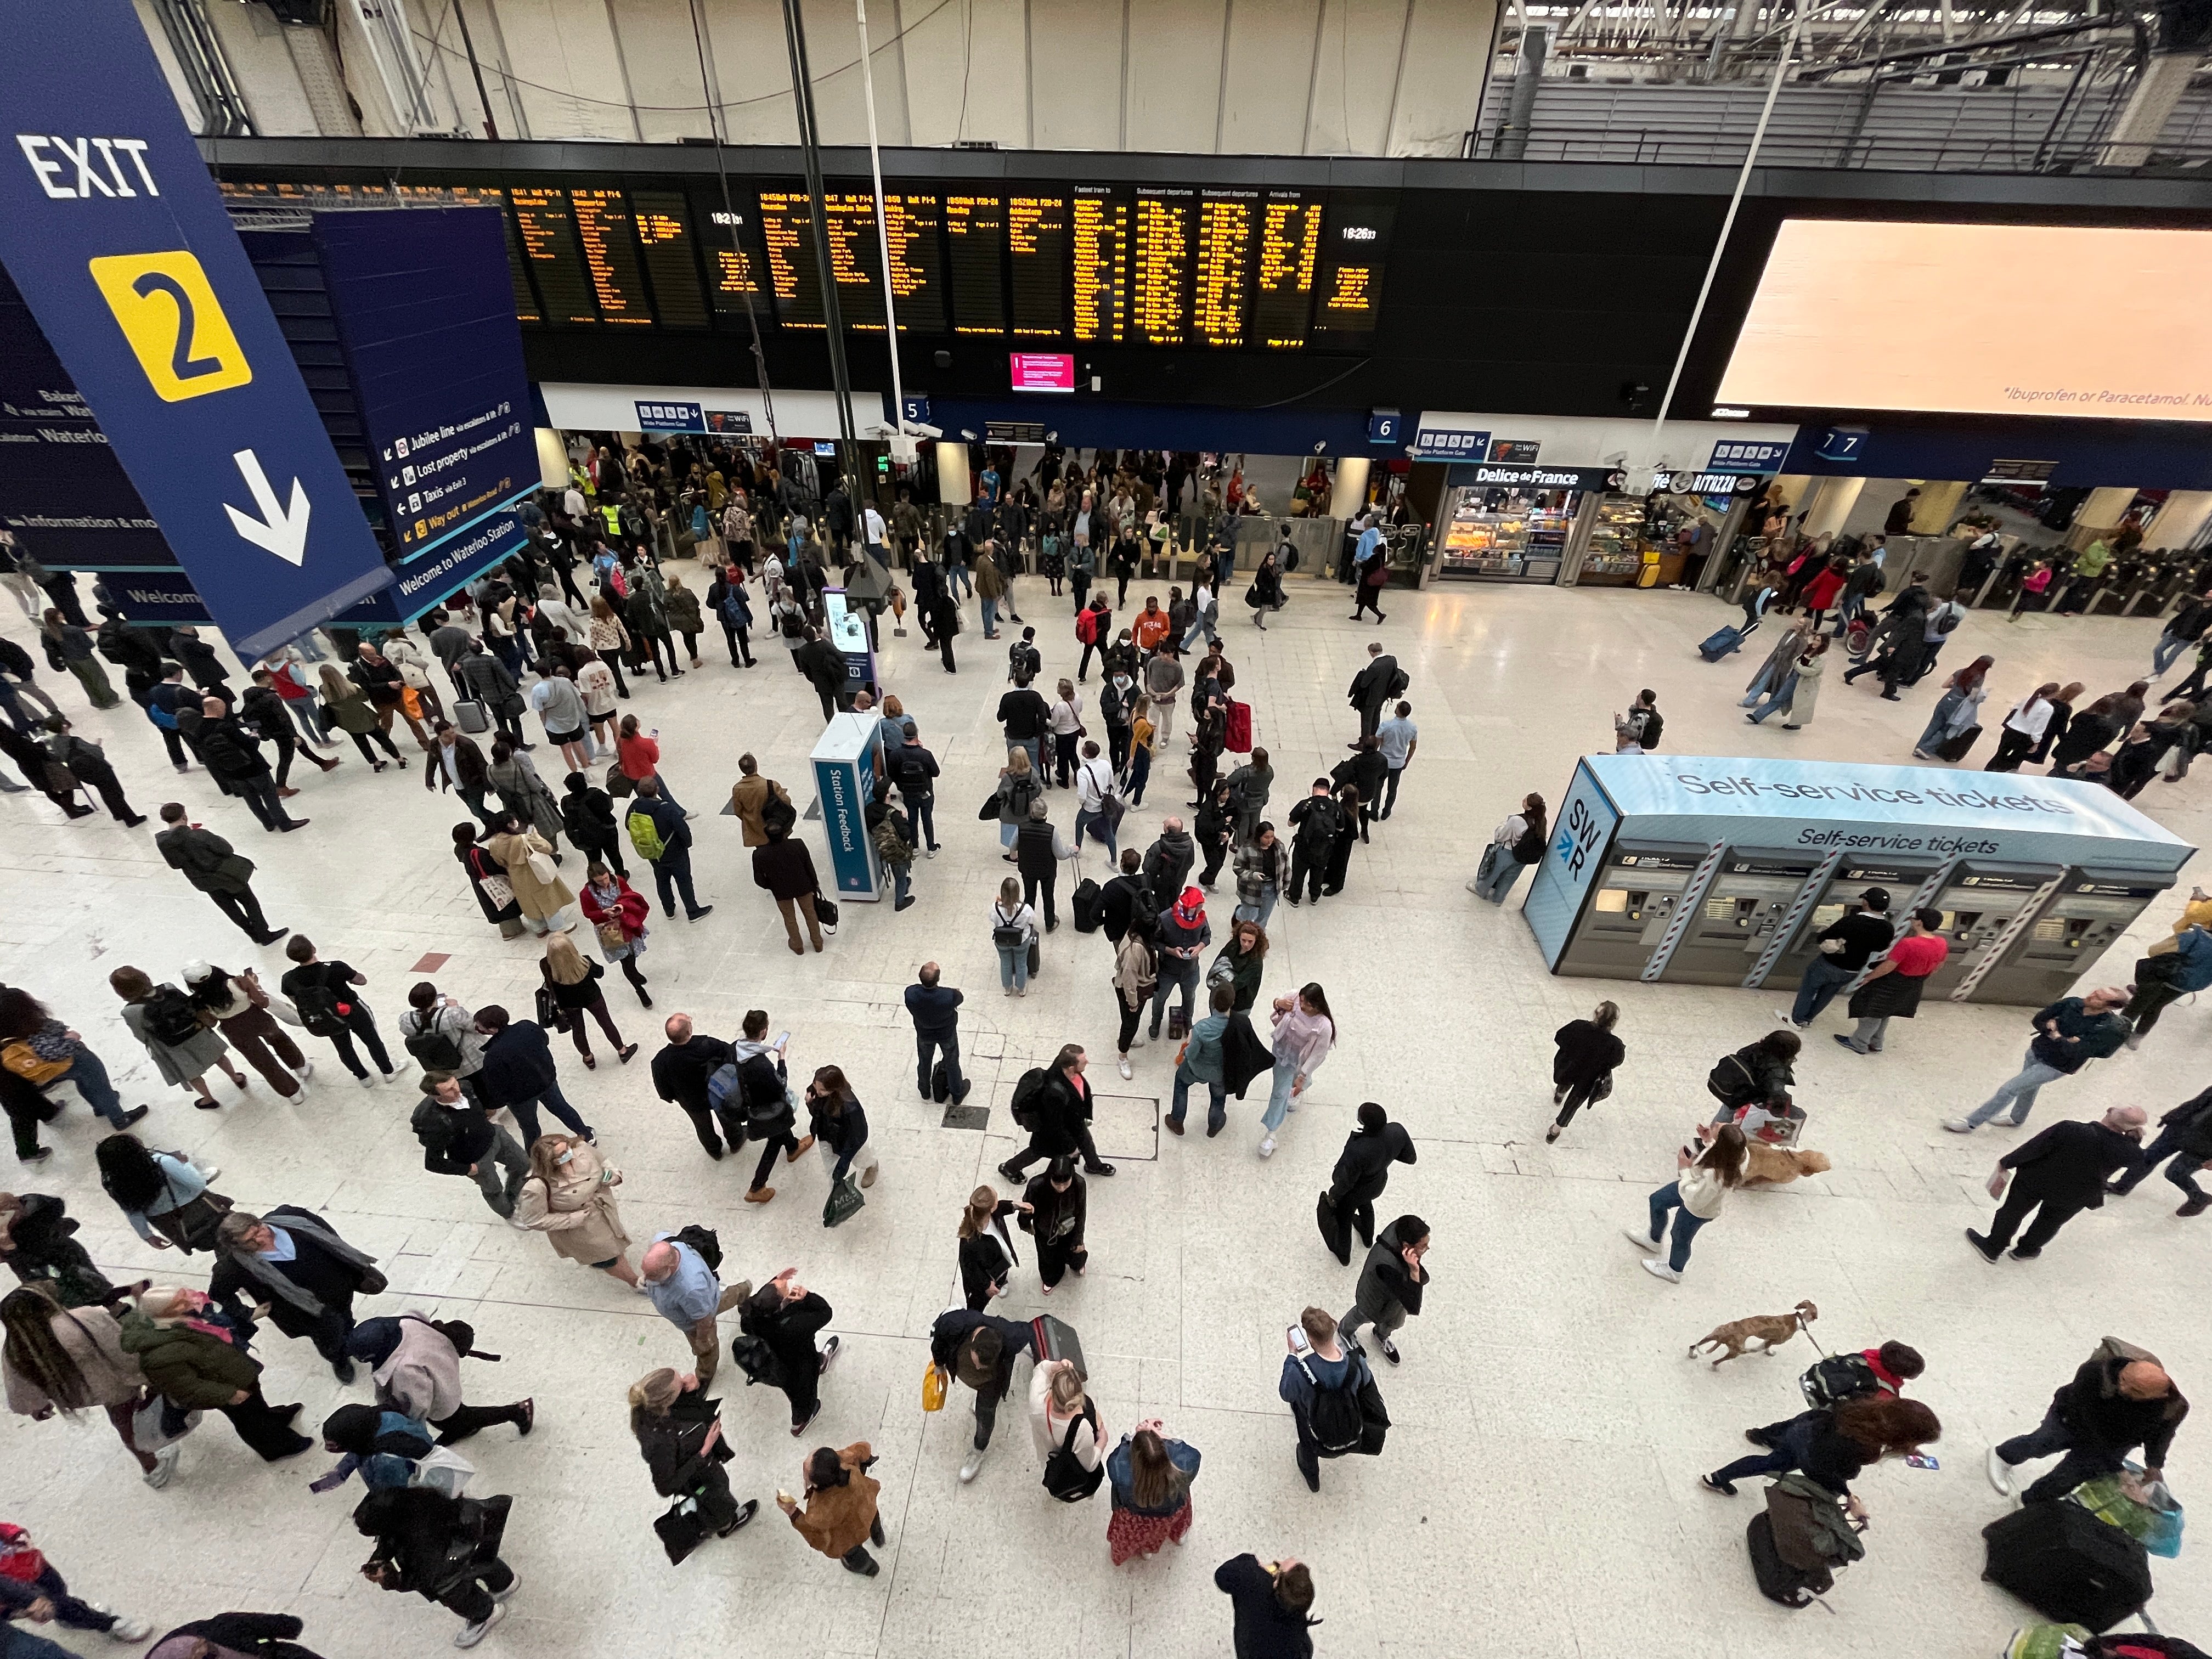 Going places? The UK’s busiest railway station, London Waterloo, on Maundy Thursday